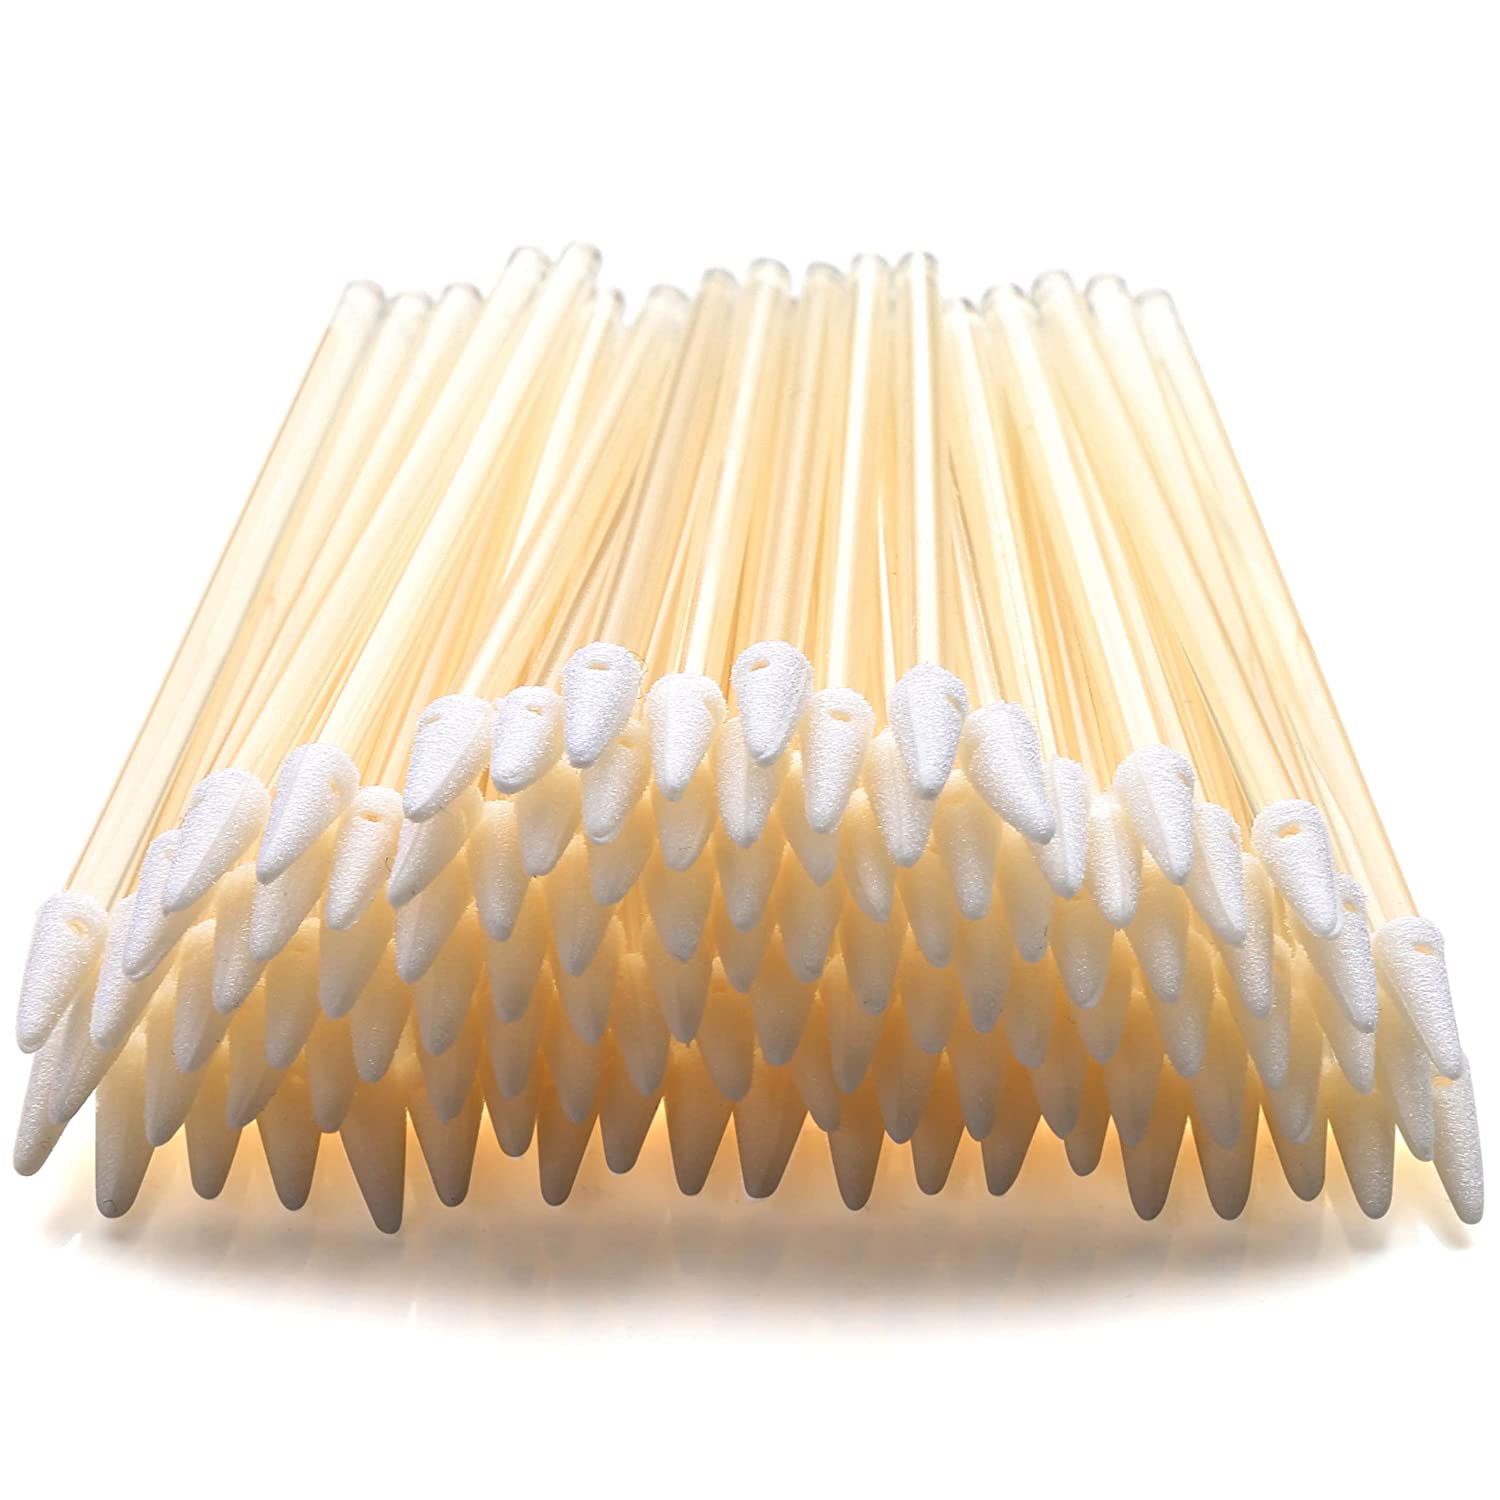 Cleanroom ESD Safe Foam Cleaning Swab Sticks Cleaning Swabs for Electronics, Static Safe Mini Tipped Sponge Sticks for Sensitive Electronics, e.g, PCB, CPU, Semiconductor  (1,000 pcs, Mini Tipped Sponge, Transparent) - (No. E750DF)